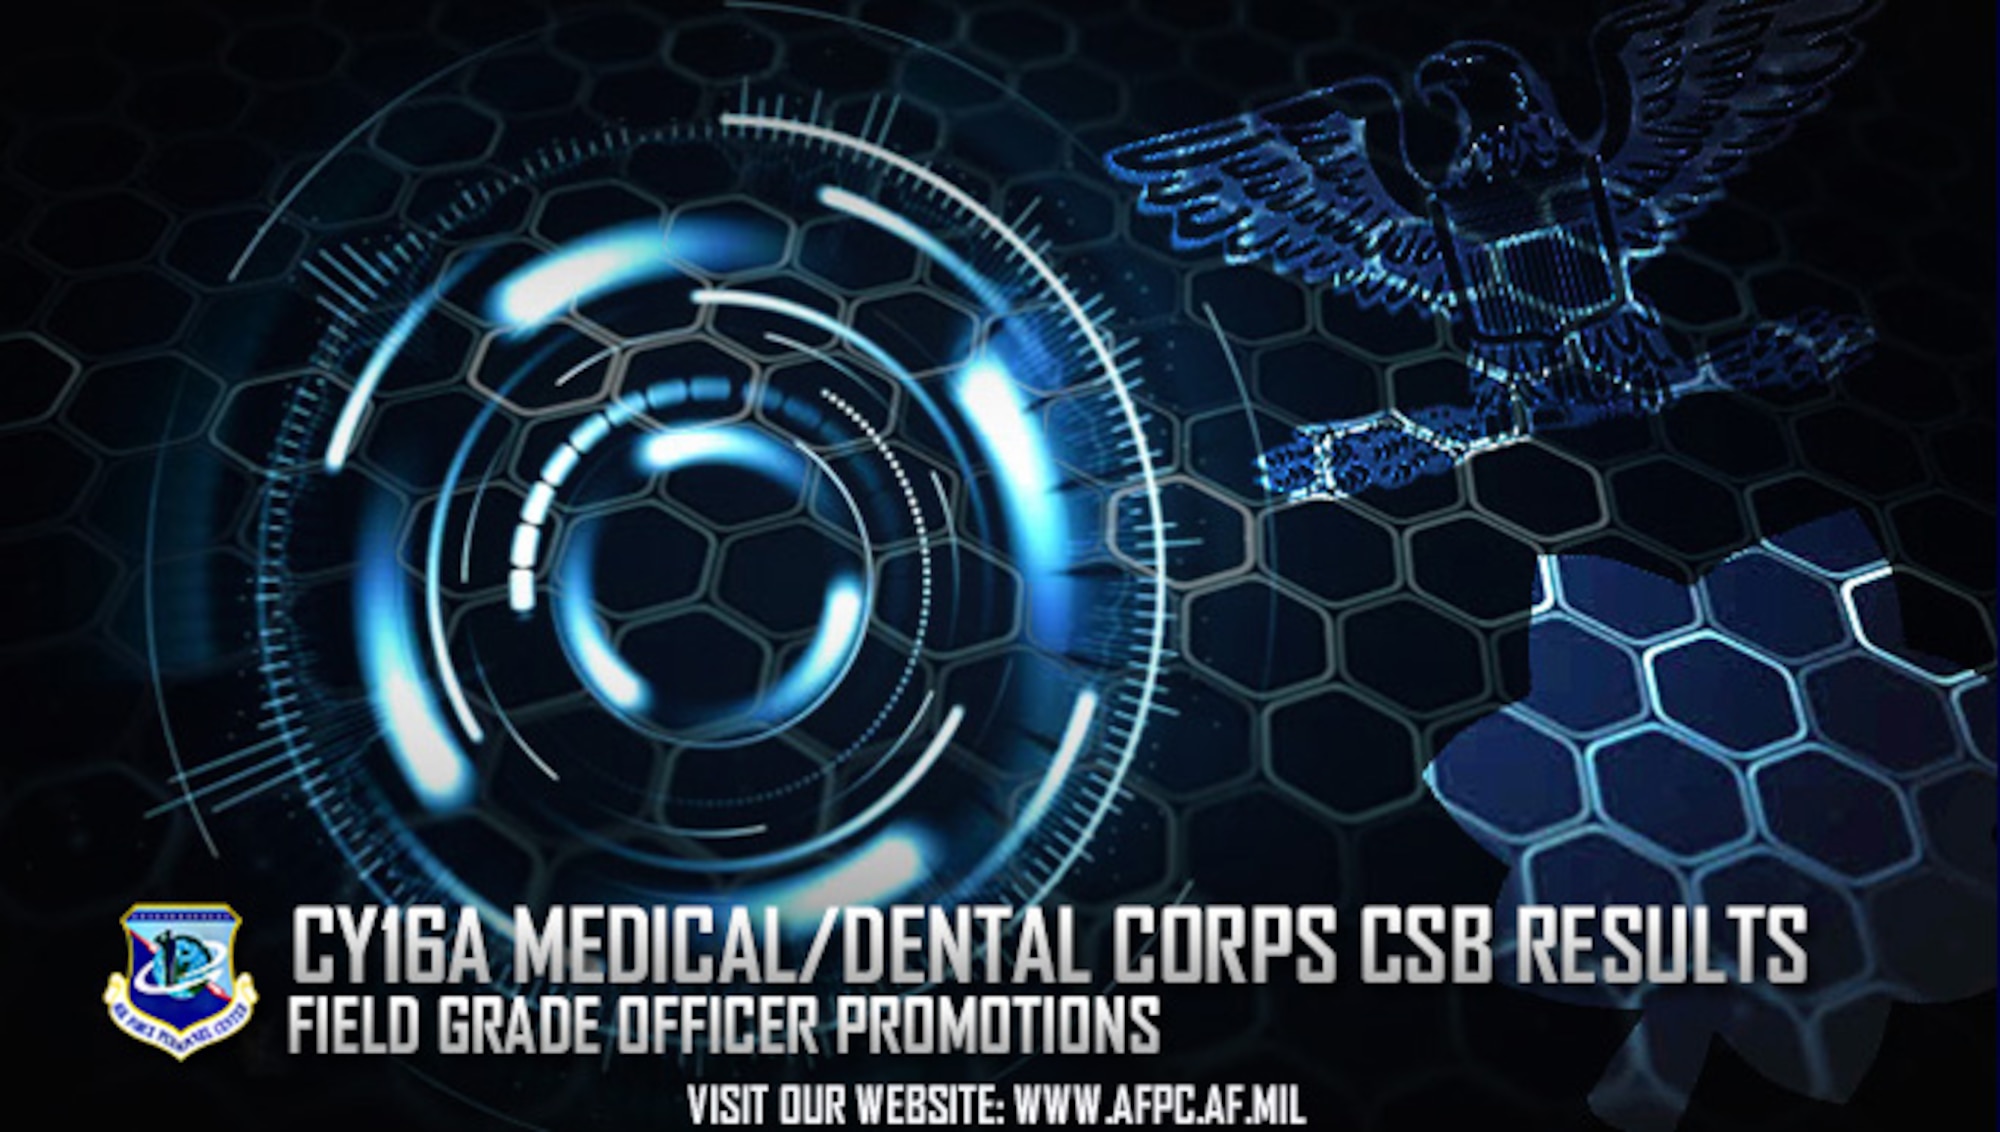 The Air Force has selected 534 officers for promotion as a result of the 2016A Medical and Dental Corps central selection boards for colonel, lieutenant colonel and major. These promotions require Senate confirmation in addition to commander’s recommendation. (U.S. Air Force graphic by Staff Sgt. Alexx Pons)